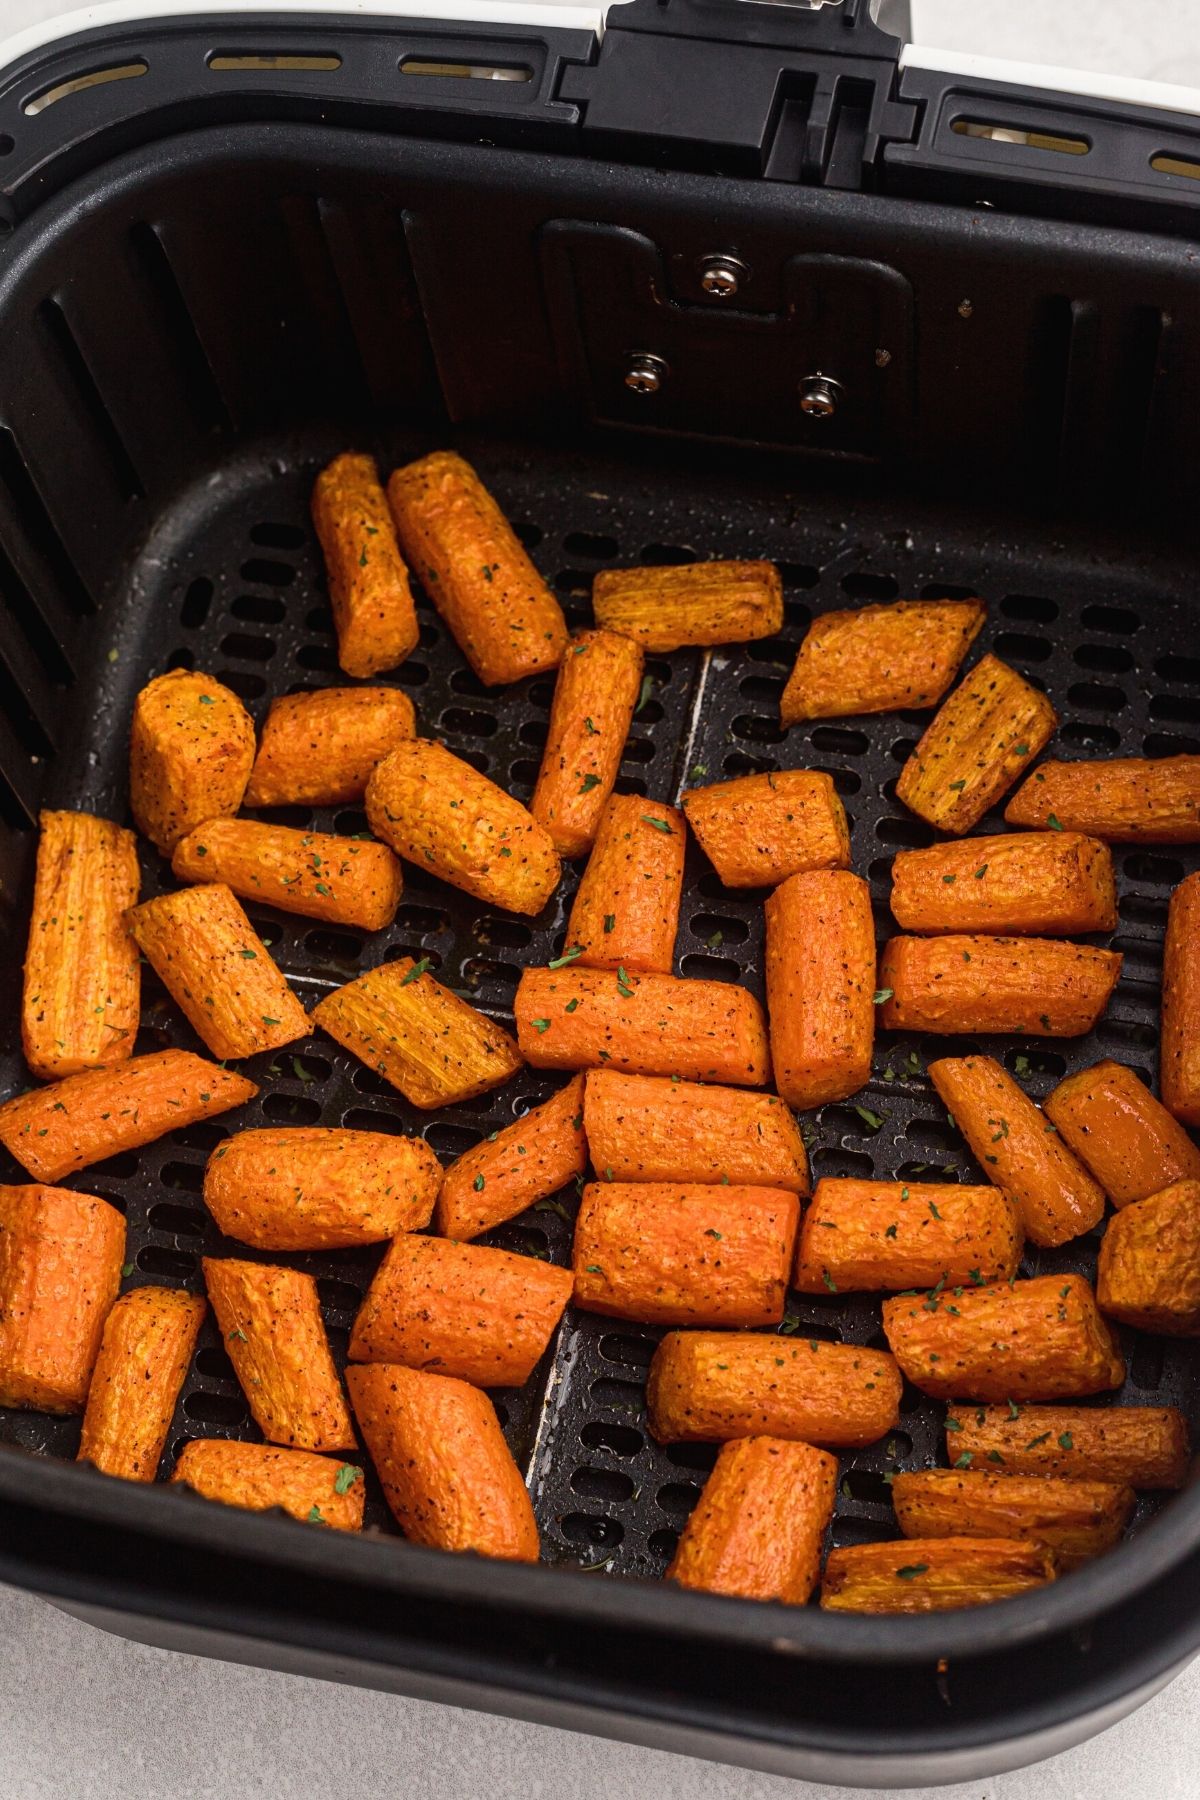 Seasoned carrots cooked in the air fryer basket.